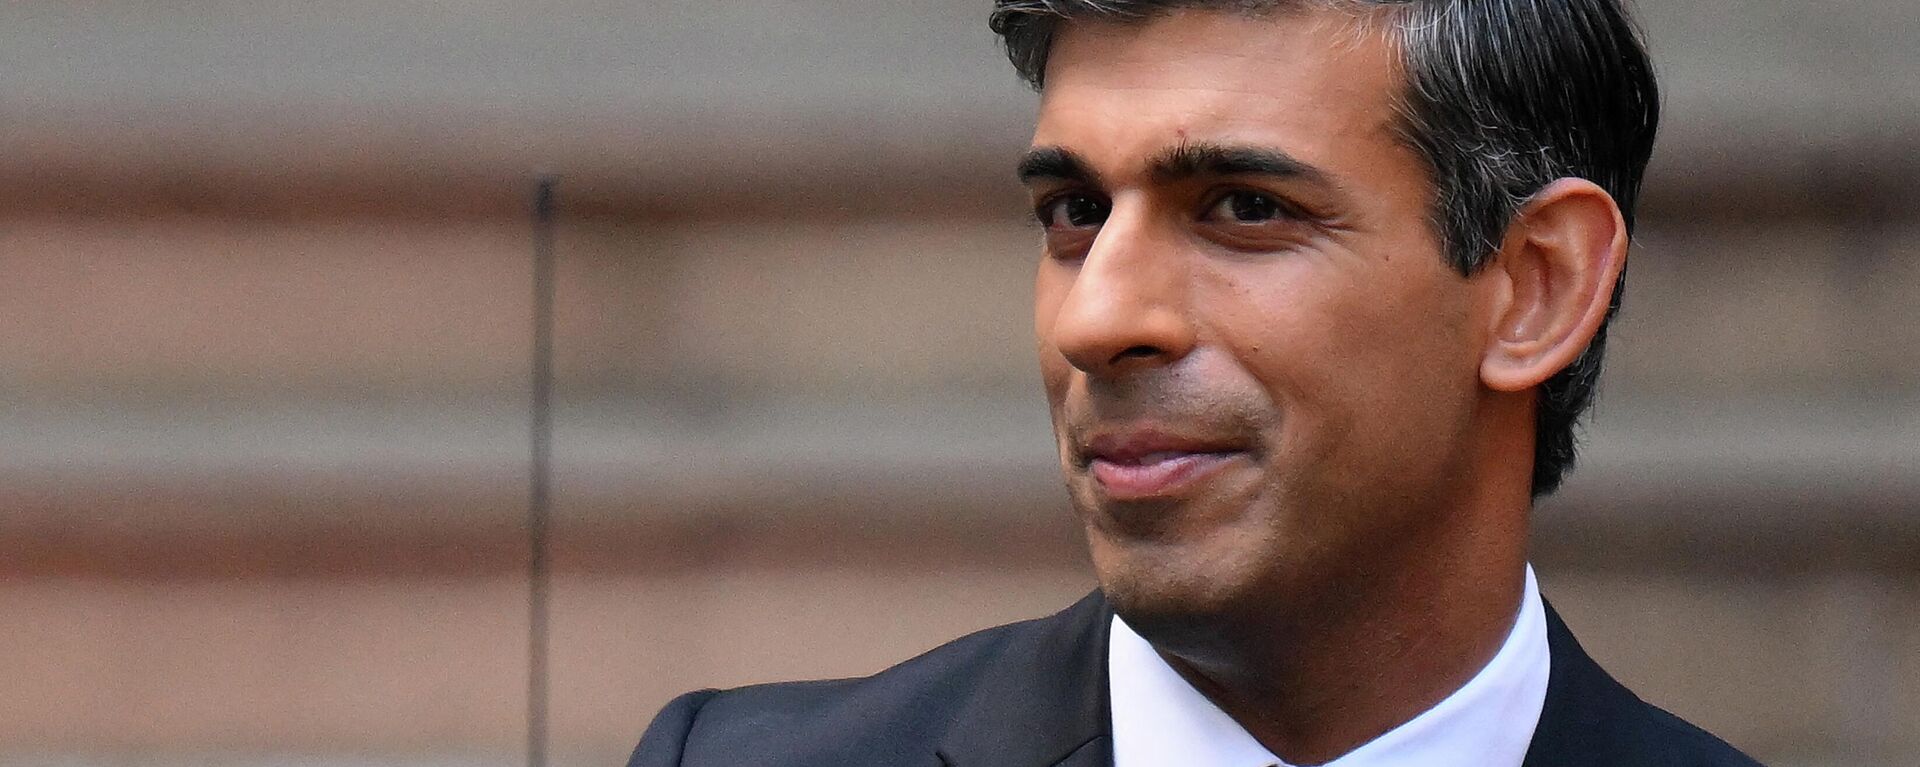 Rishi Sunak enters a car as he leaves from Conservative Party Headquarters in central London having been announced as the winner of the Conservative Party leadership contest, on October 24, 2022. - Sputnik International, 1920, 04.01.2023